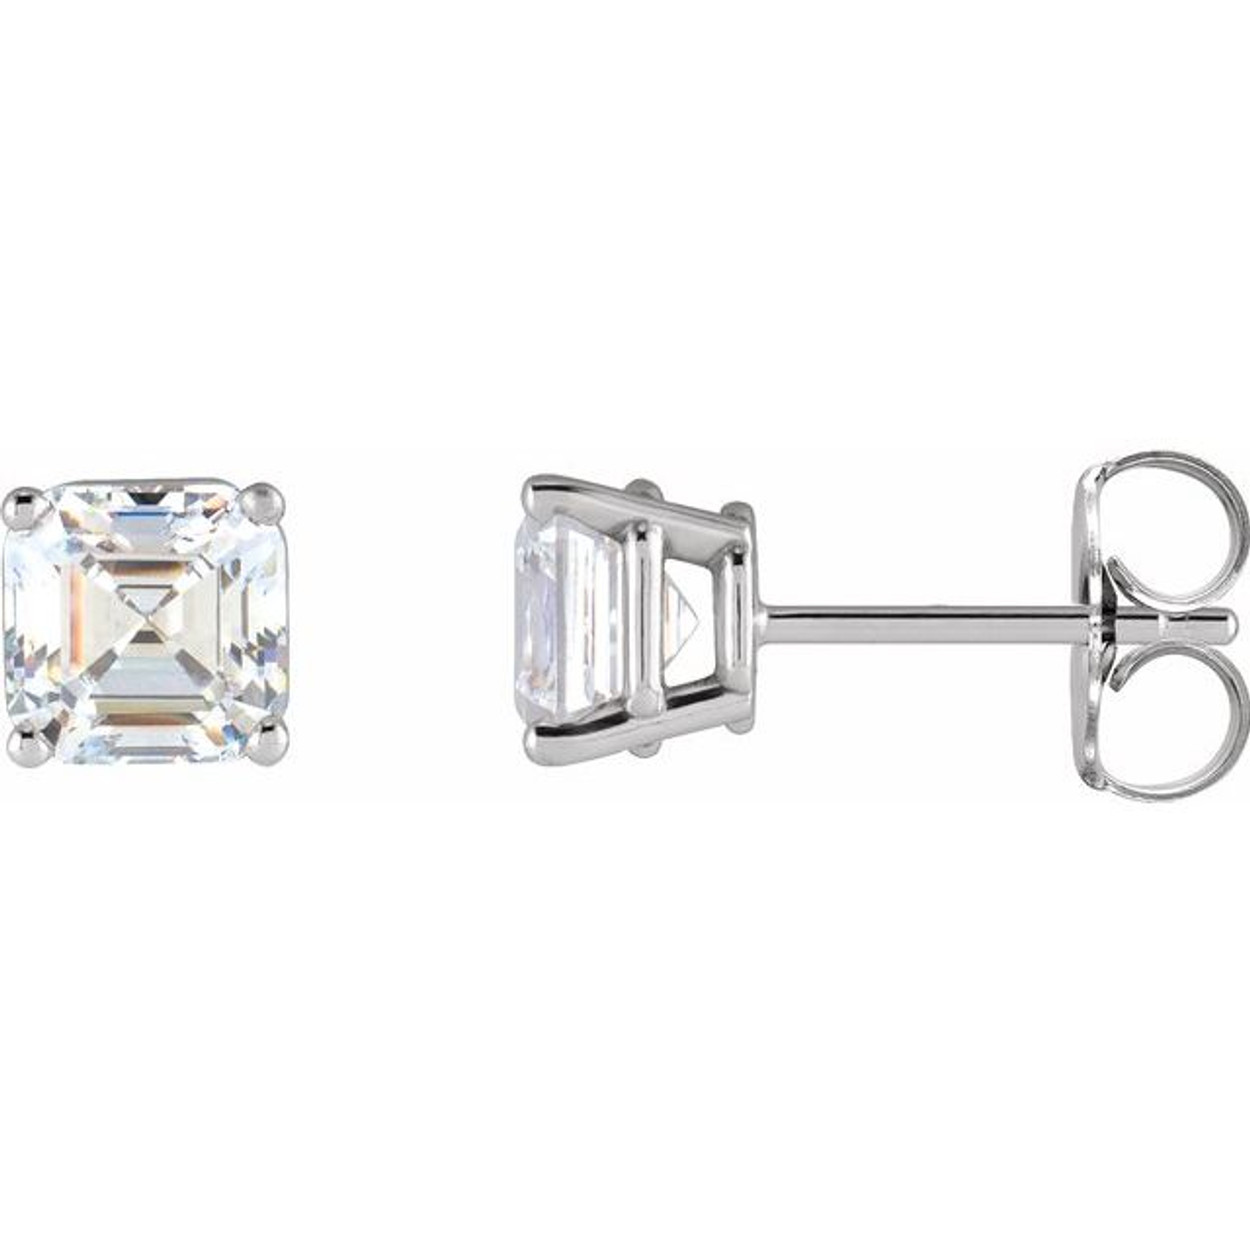 (NEW) BELLA COUTURE® VALE VS1 ASSCHER CUT DIAMOND 14K WHITE GOLD 4-PRONG STUD POST EARRINGS (1/3 CT. TW.)